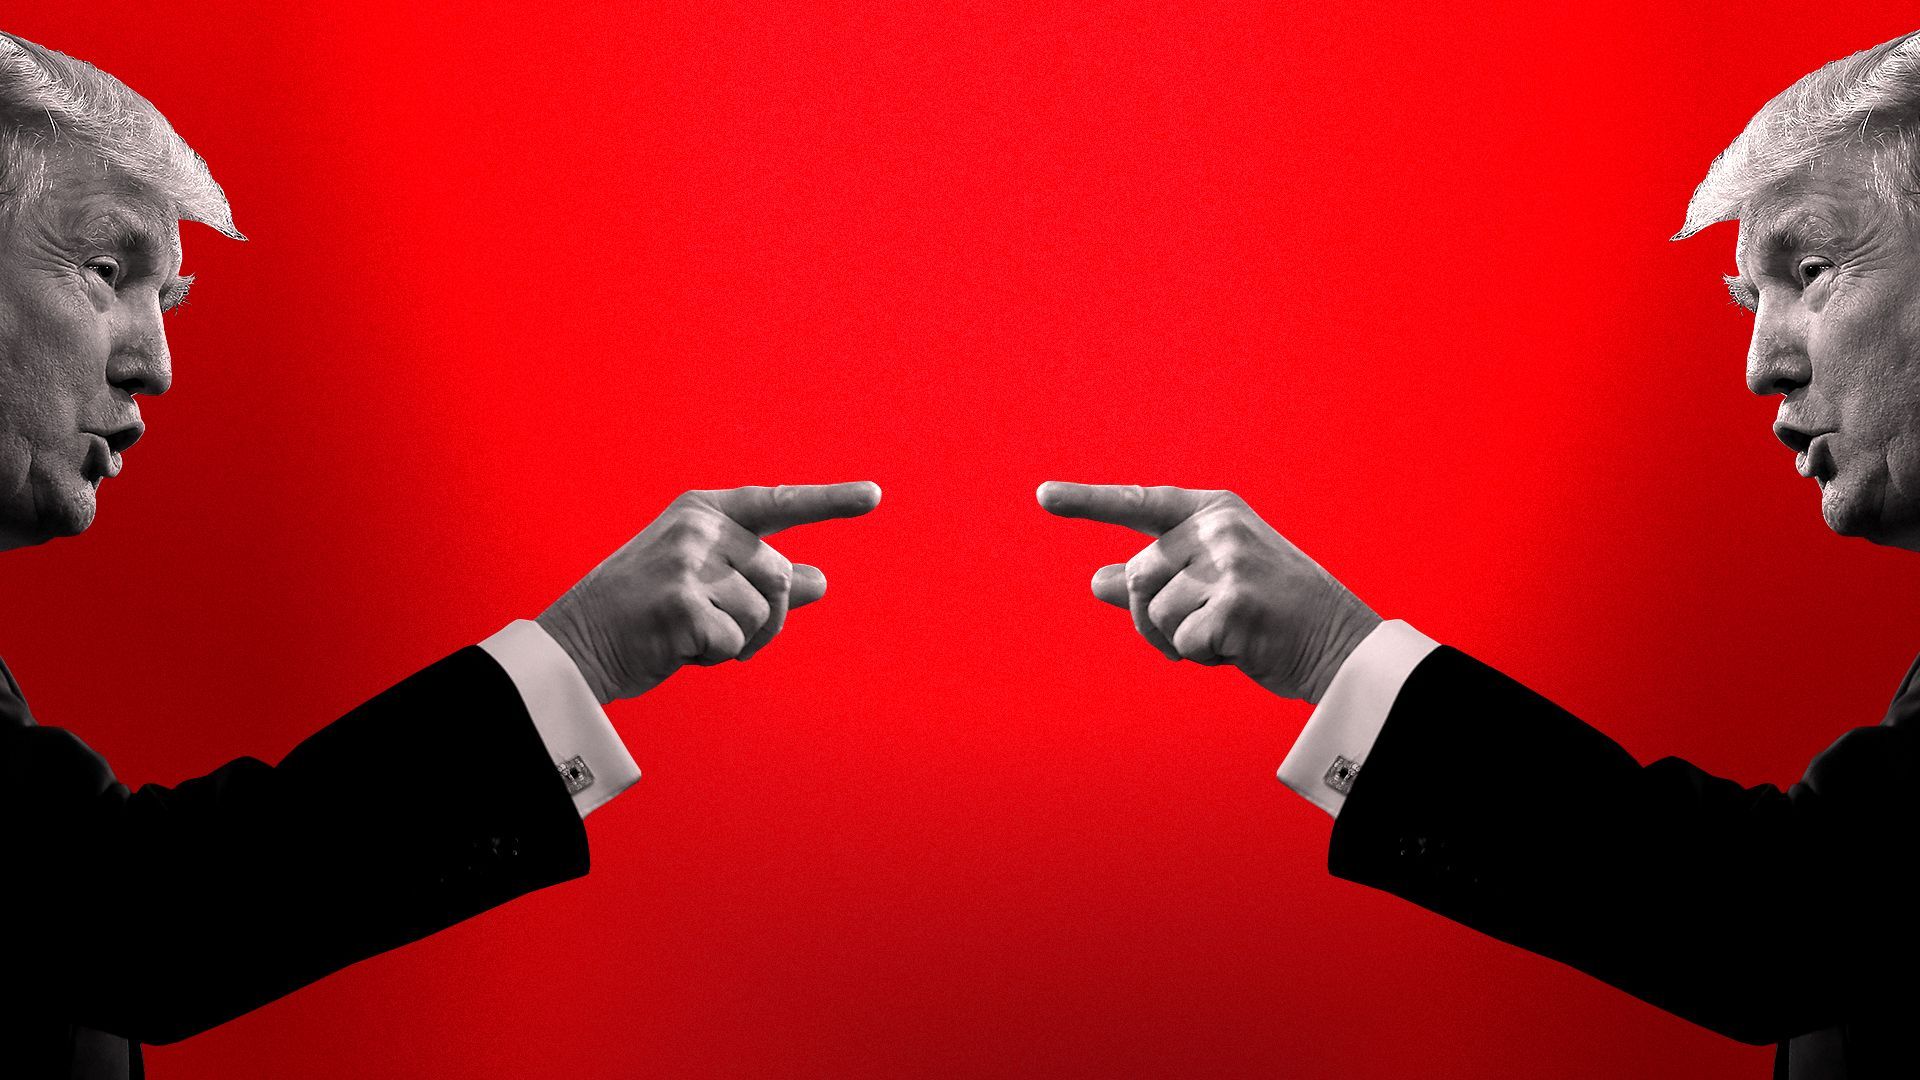 Photo illustration of two mirror images of Trump pointing his finger